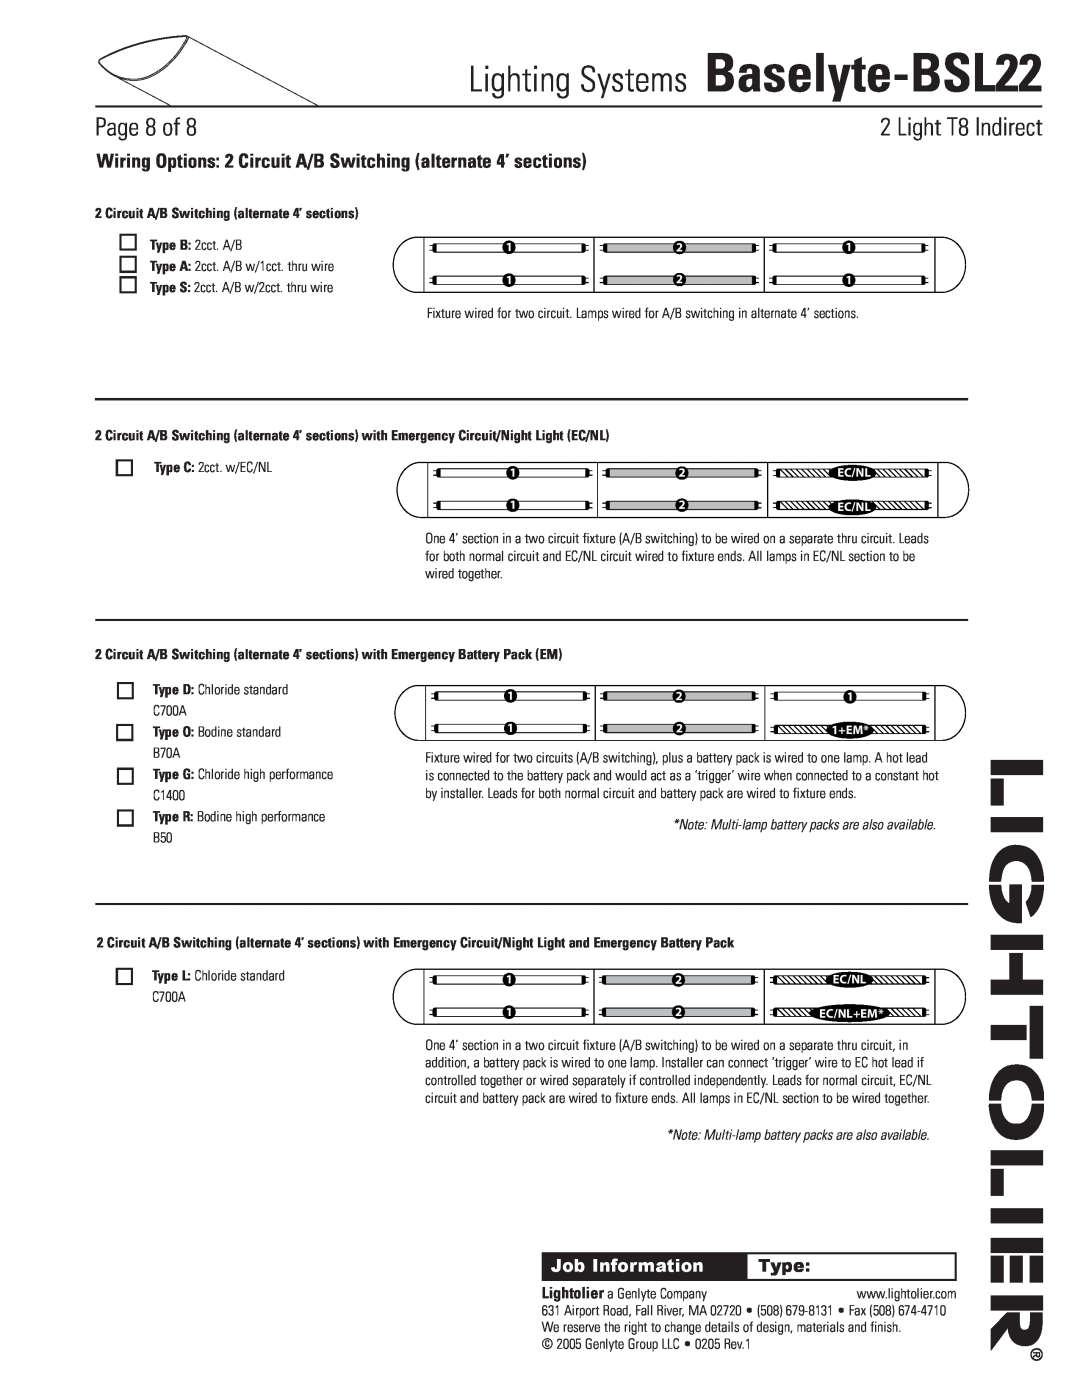 Lightolier Baselyte-BSL22 specifications Circuit A/B Switching alternate 4’ sections, Type O Bodine standard B70A, Page of 